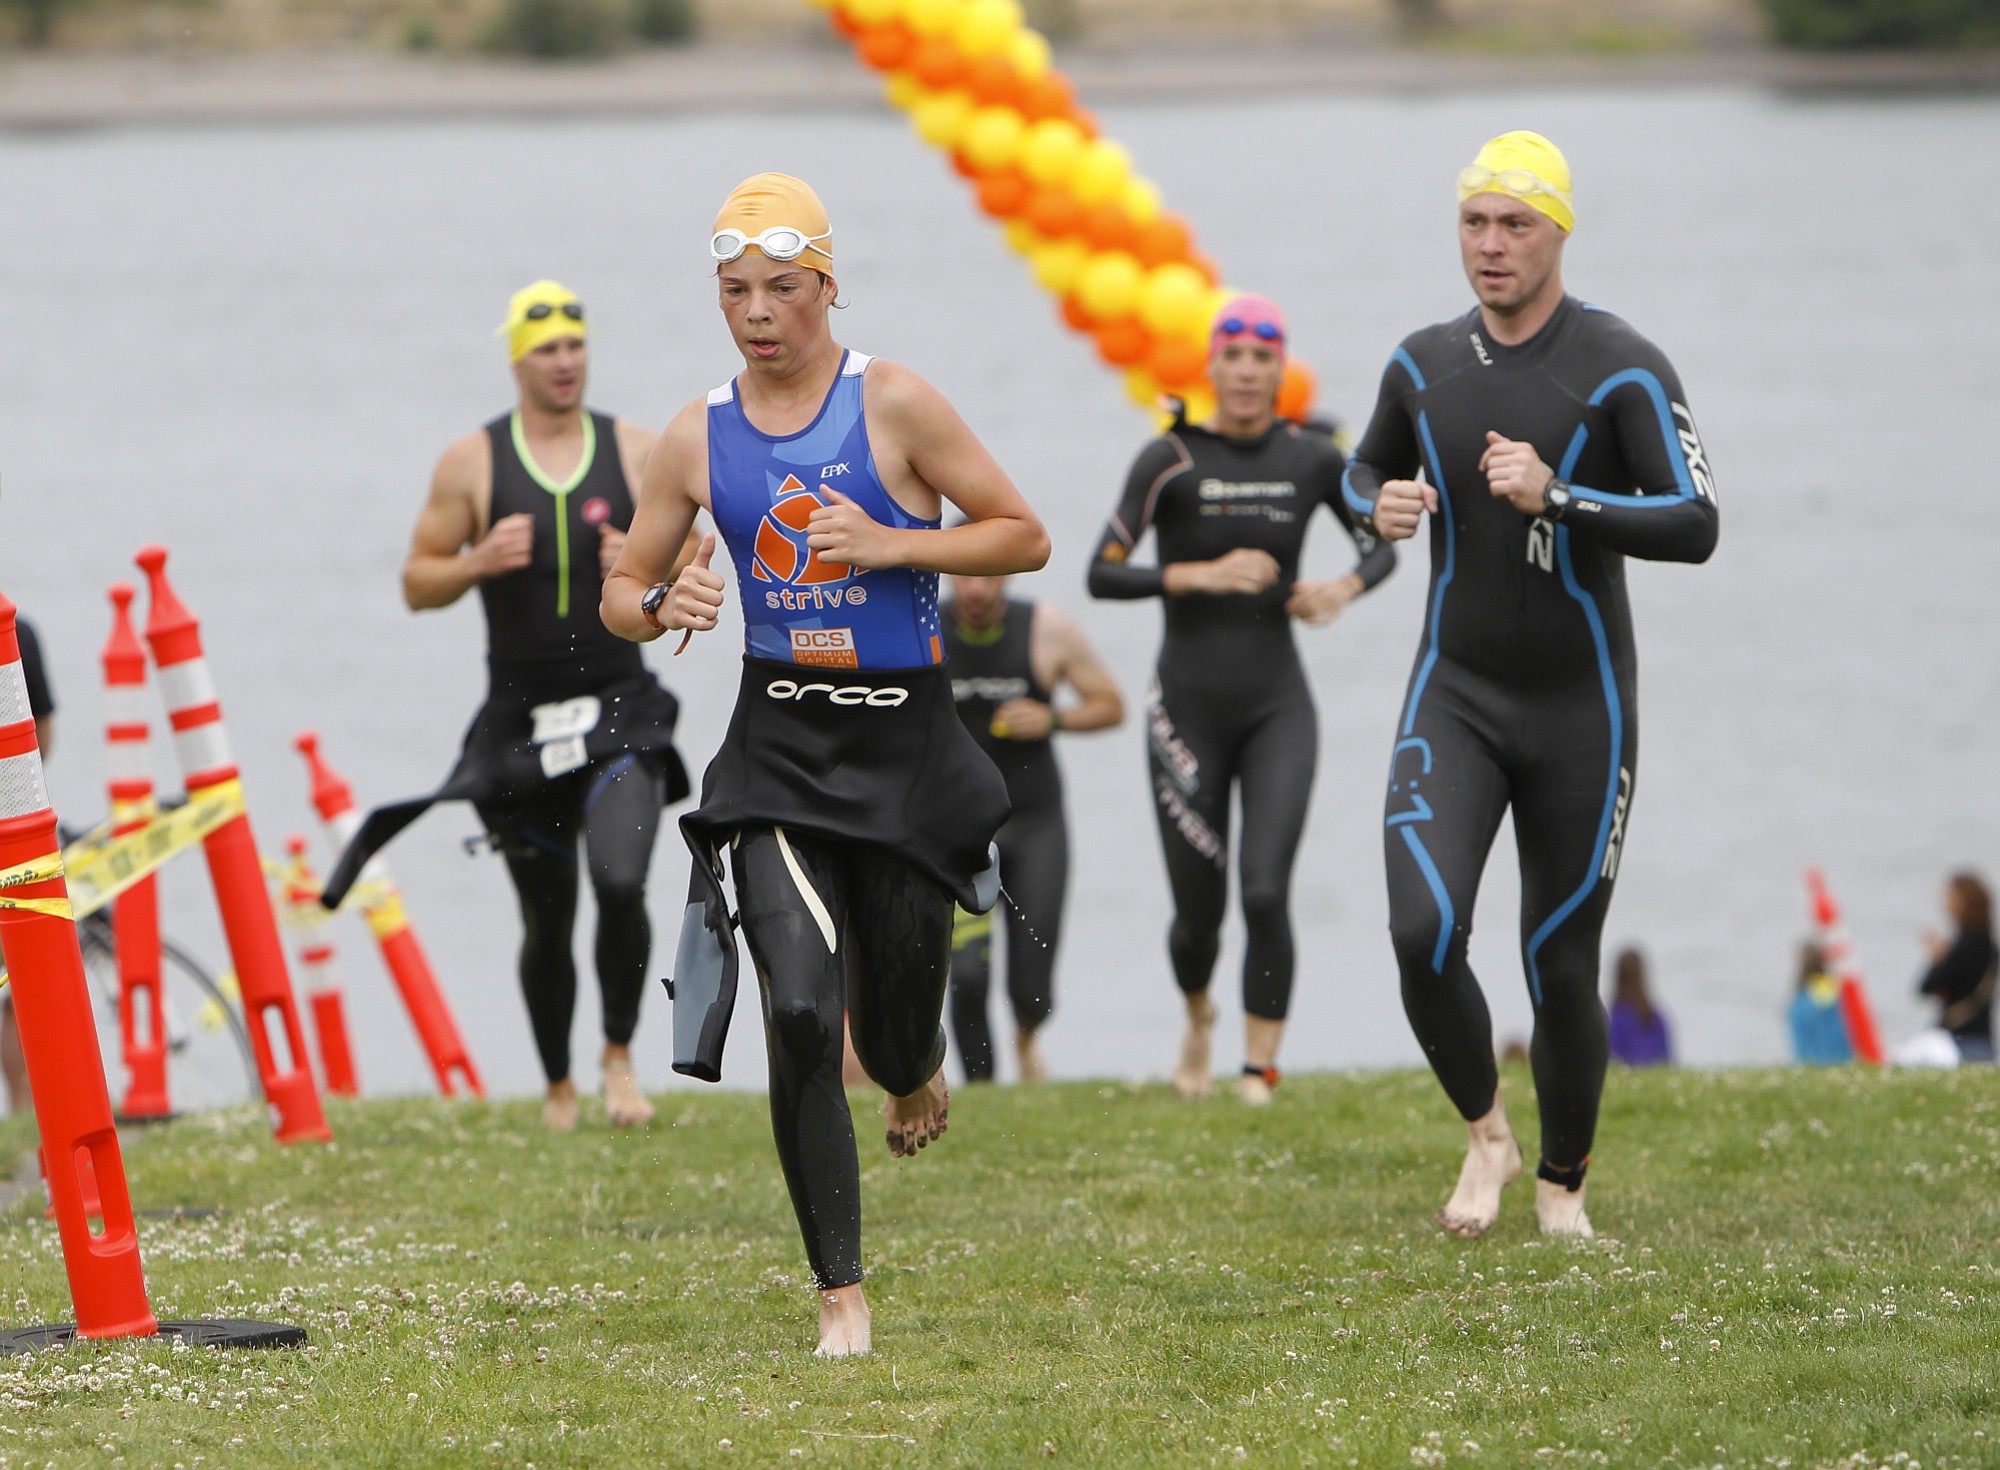 Participants leave the Columbia River following the half-mile swim portion of the Girlfriends and Dudes Triathlon on Sunday at Frenchman's Bar Park. Next was a 12.5-mile bike ride, and then a 3-mile run.